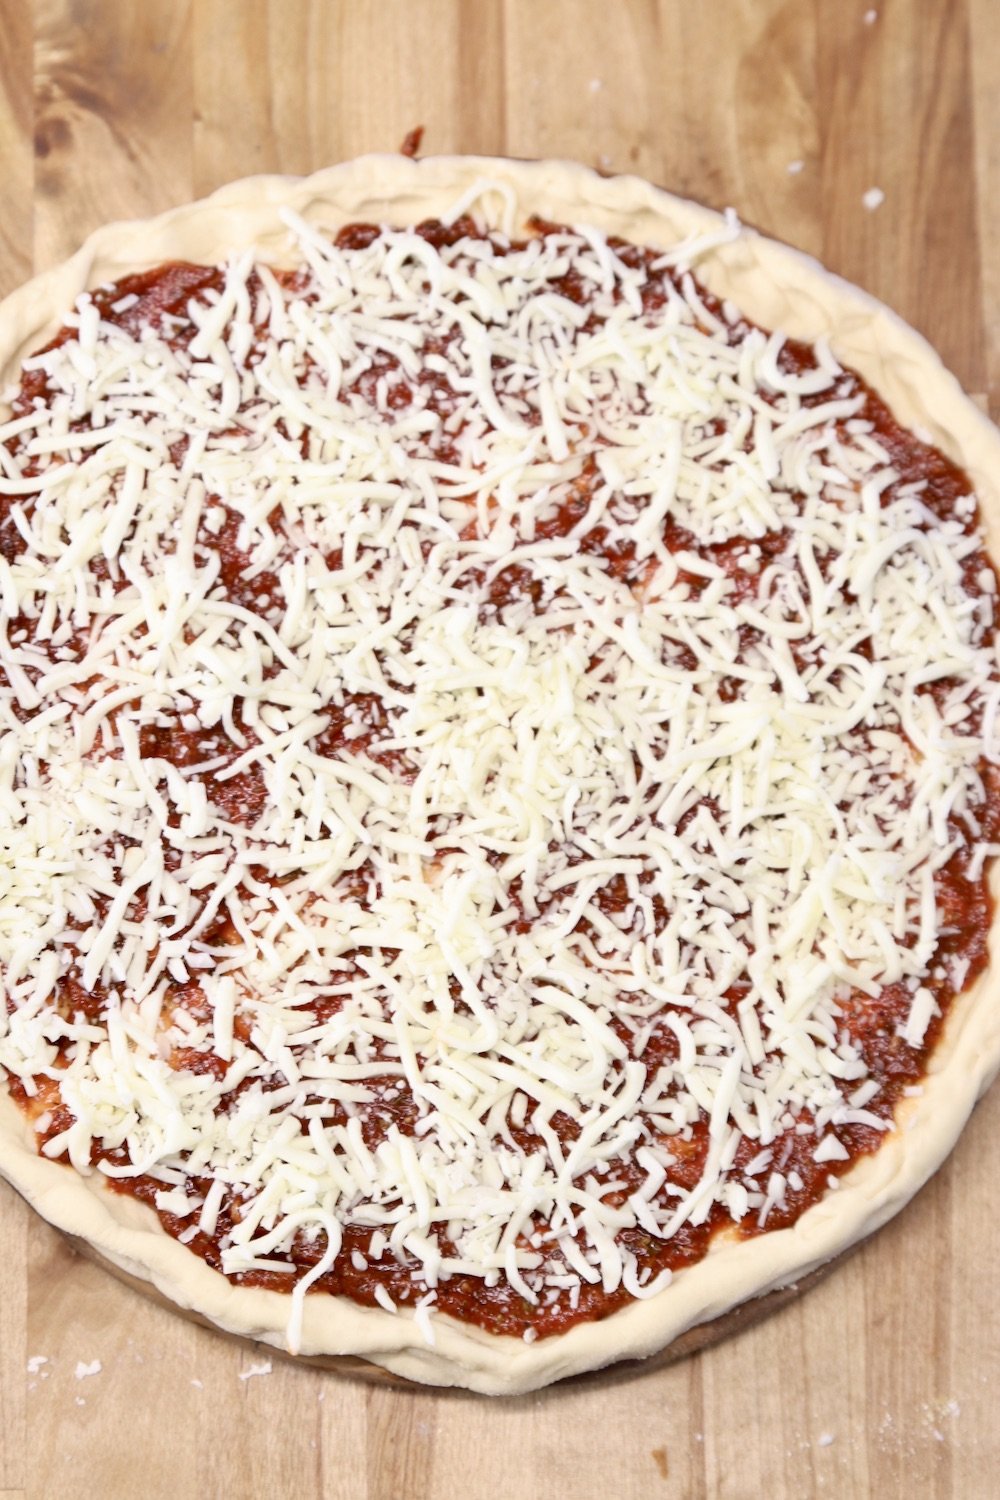 pizza topped with shredded cheese